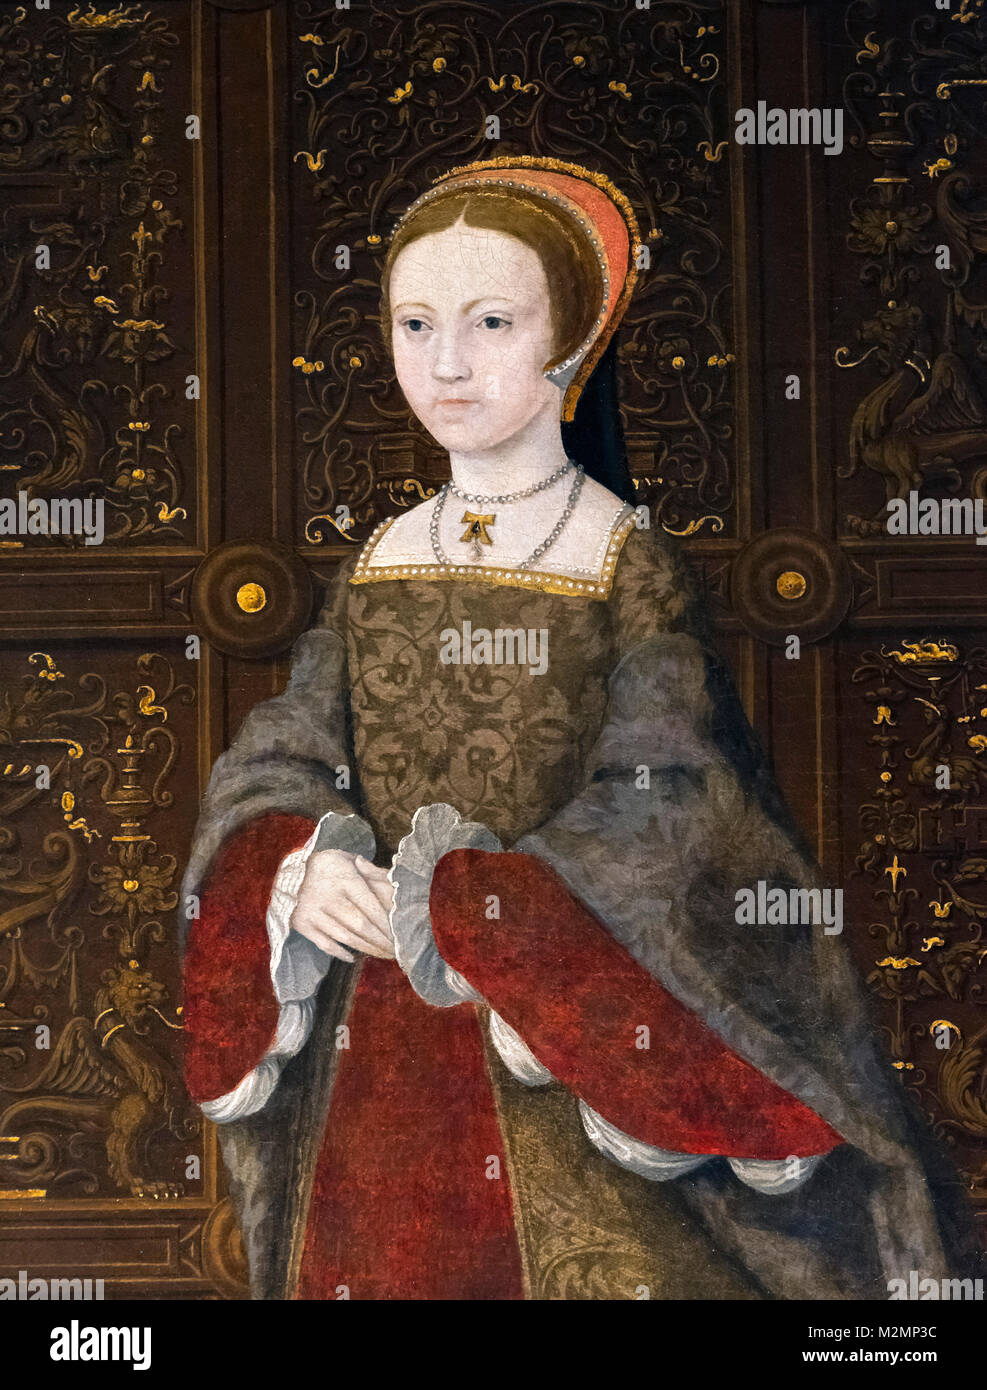 Elizabeth I. Portrait of the future Queen Elizabeth I (1533-1603) as Princess Elizabeth at the age of 12. Detail of a painting entitled The Family of Henry VIII, oil on panel, c.1545 Stock Photo